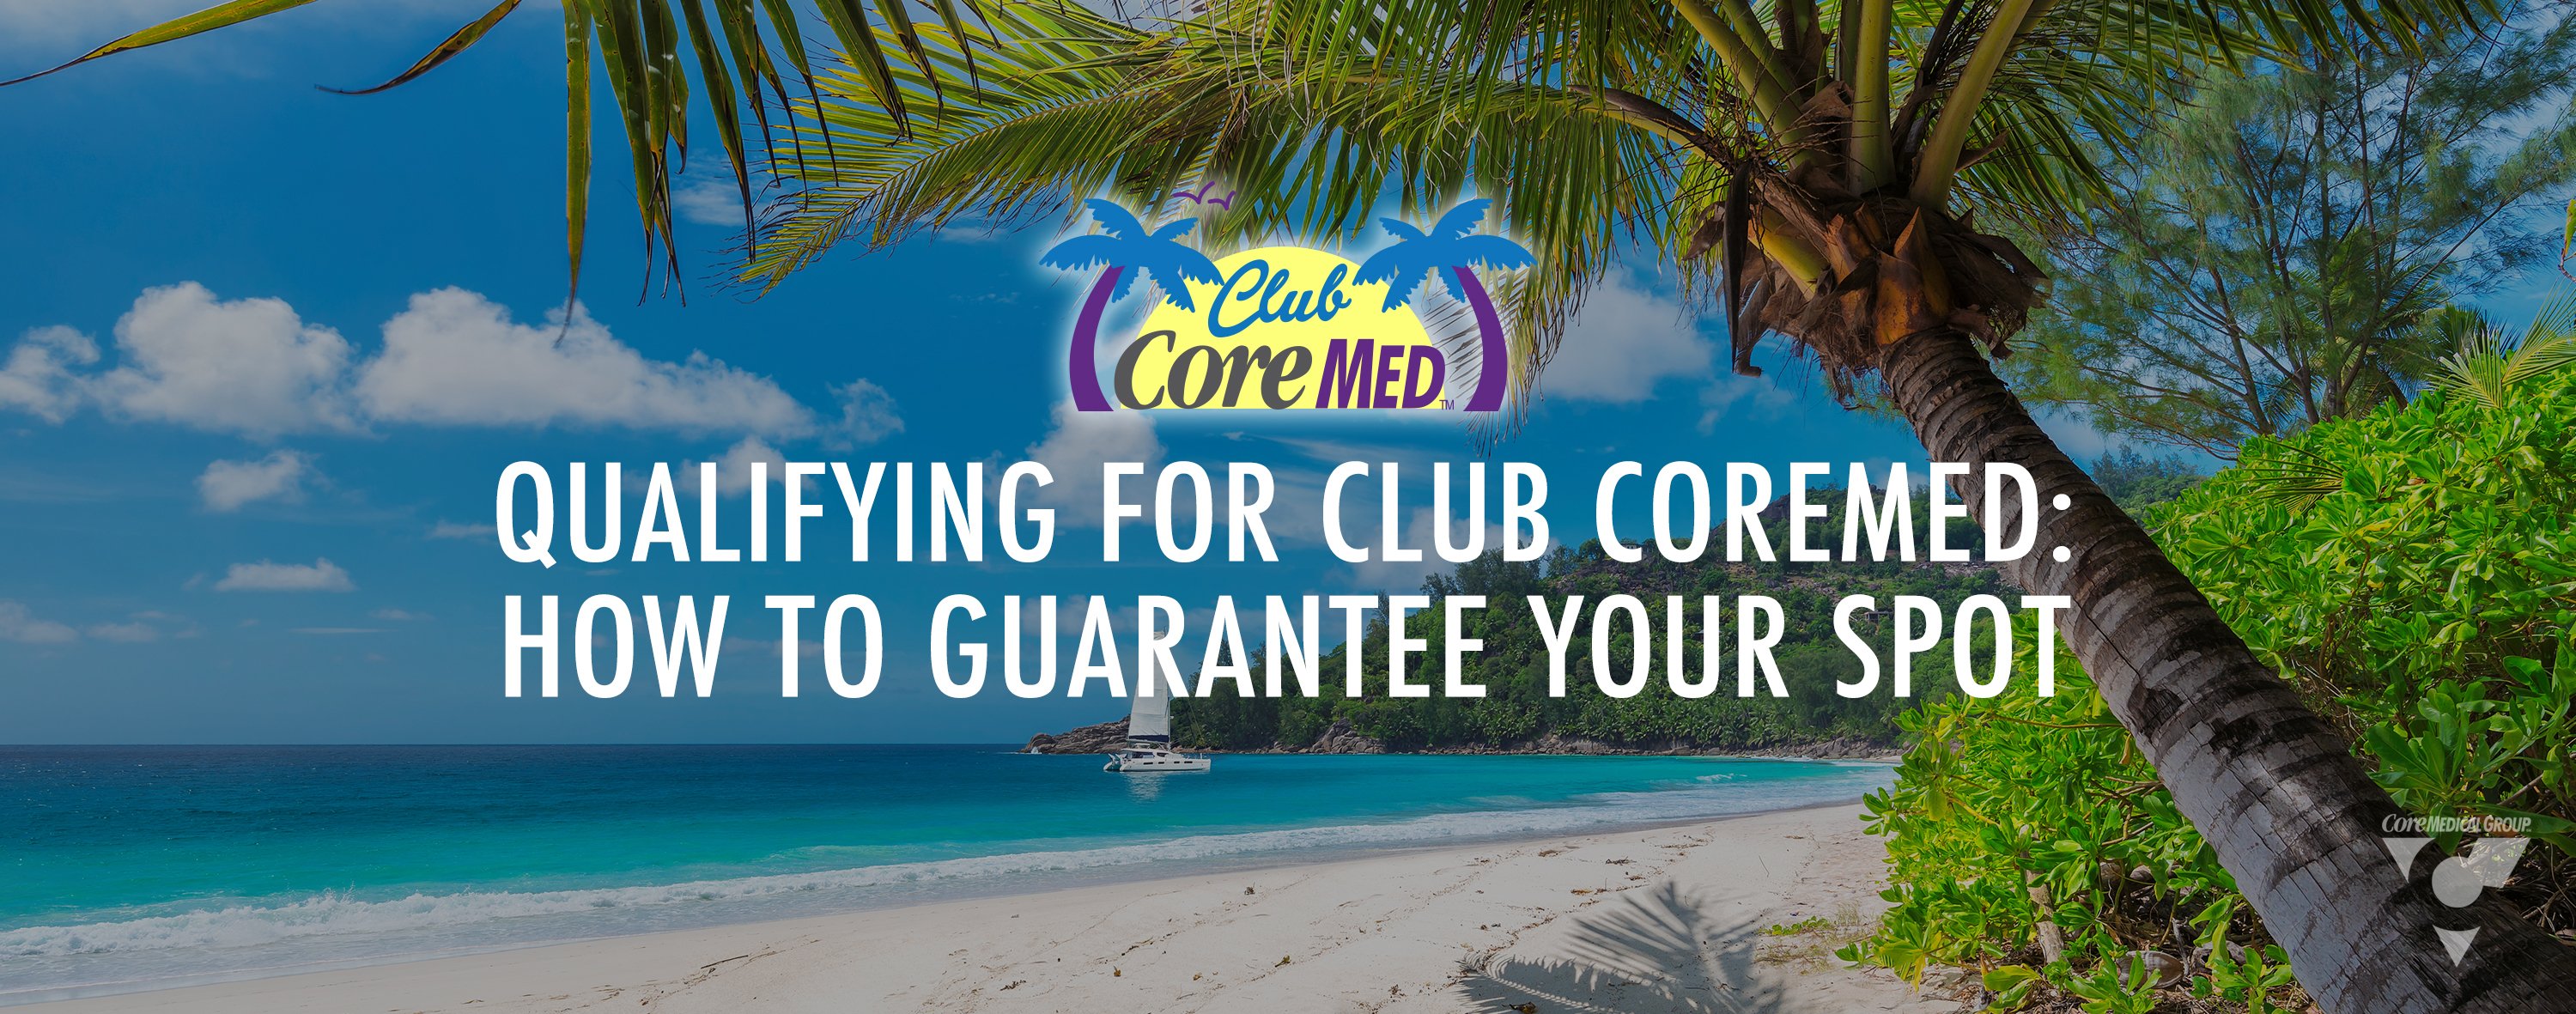 How to qualify for club core med